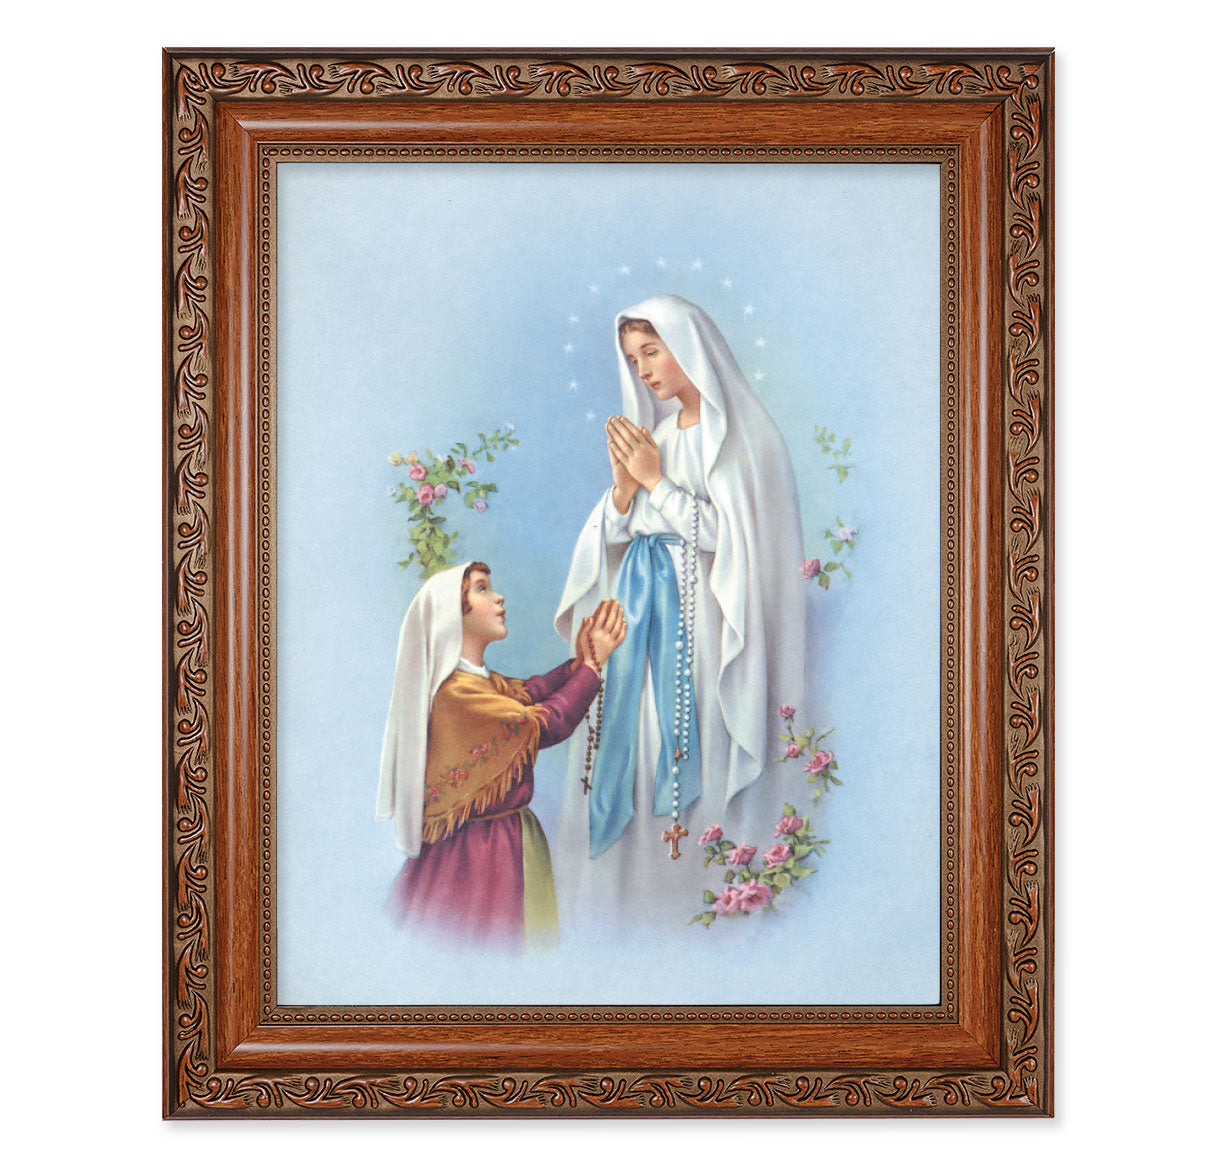 Our Lady of Lourdes Mahogany Finished Framed Art